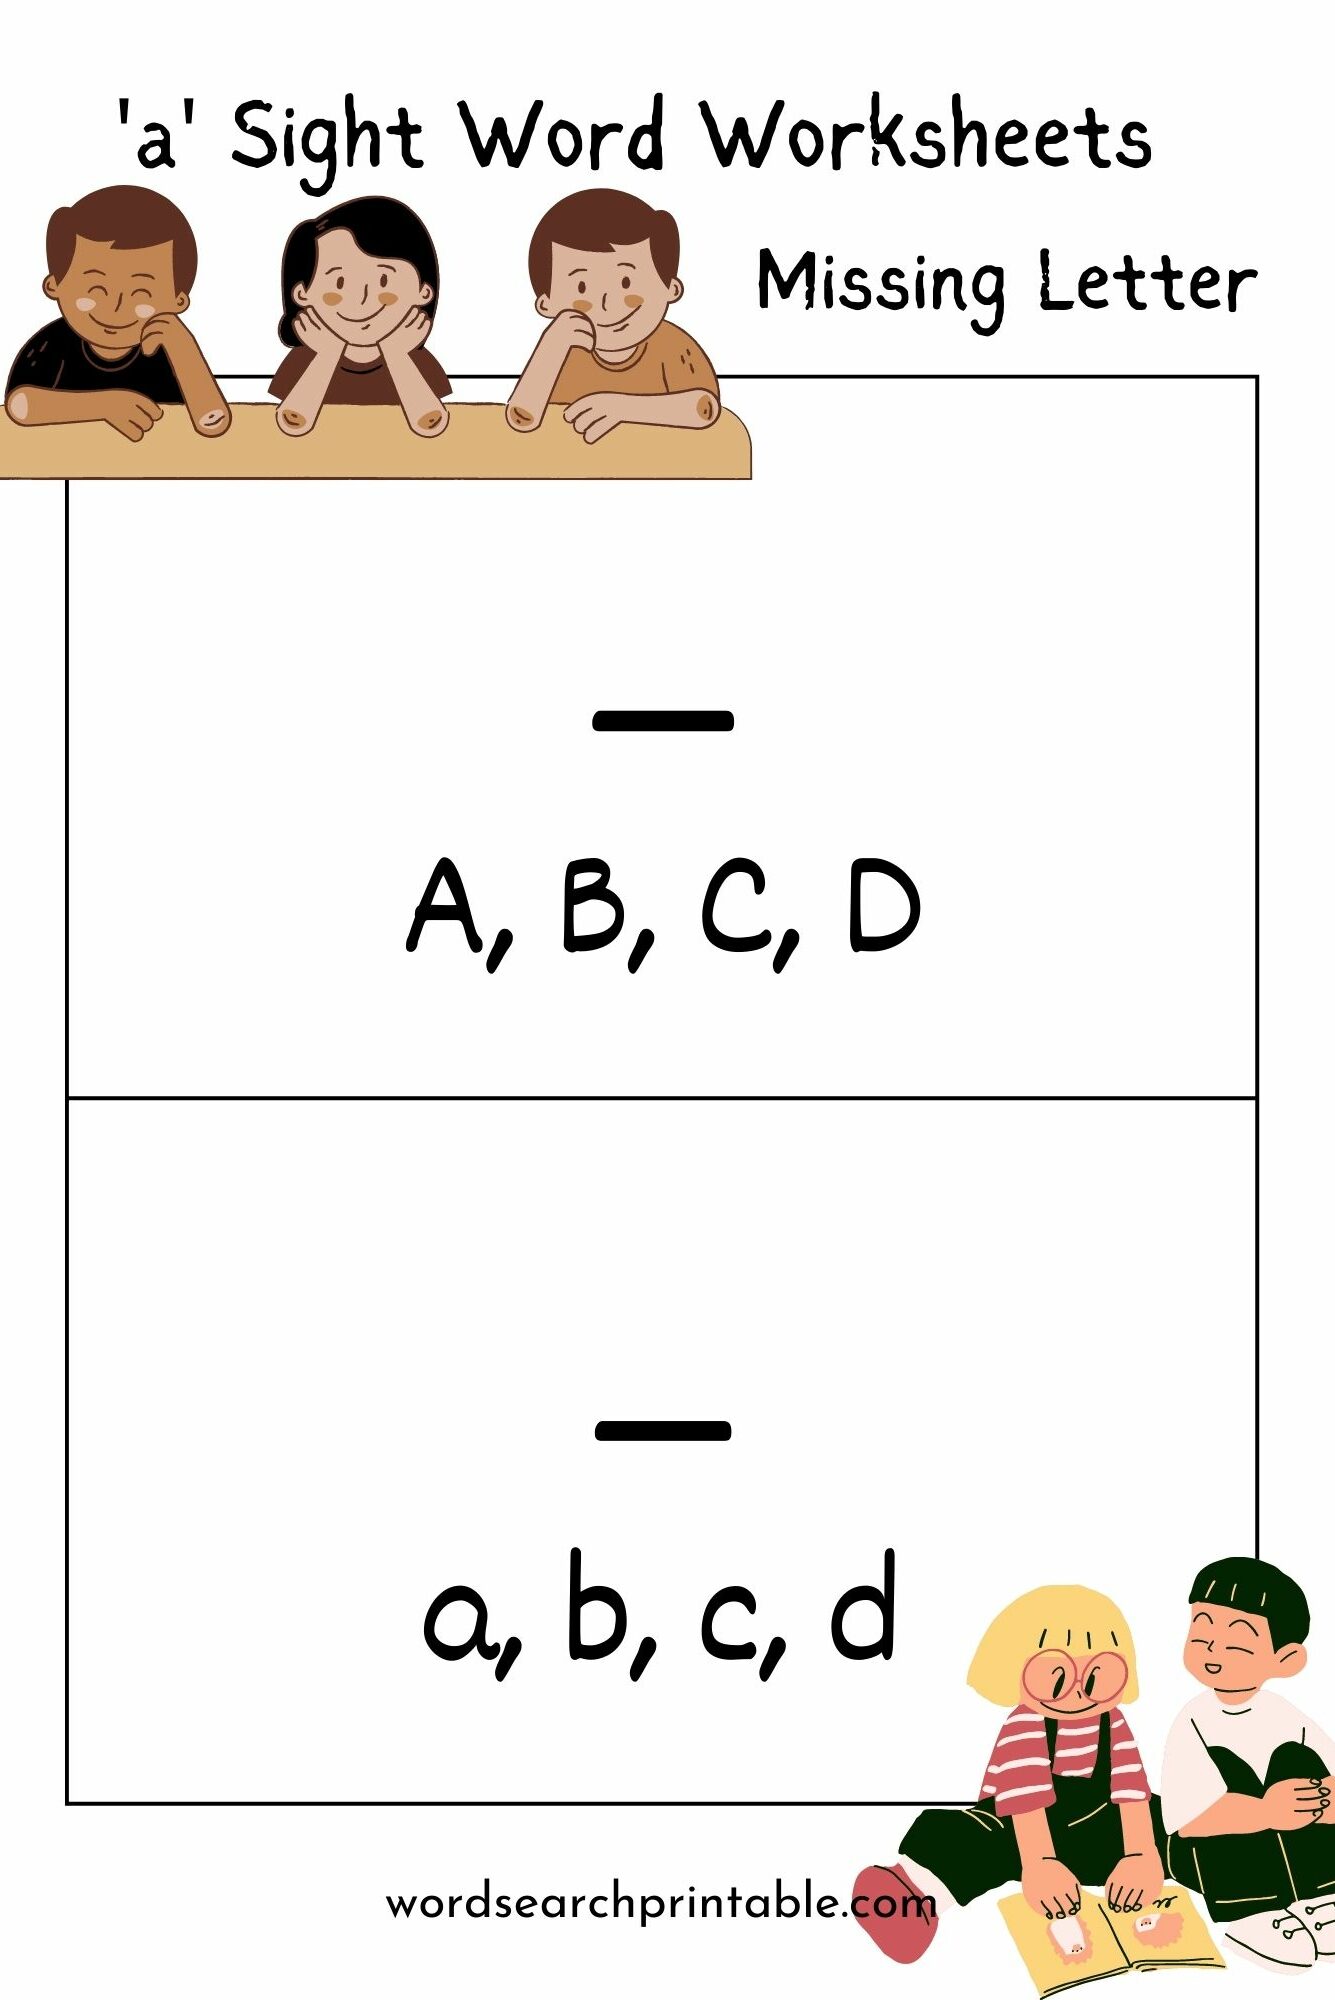 Write the sight word A